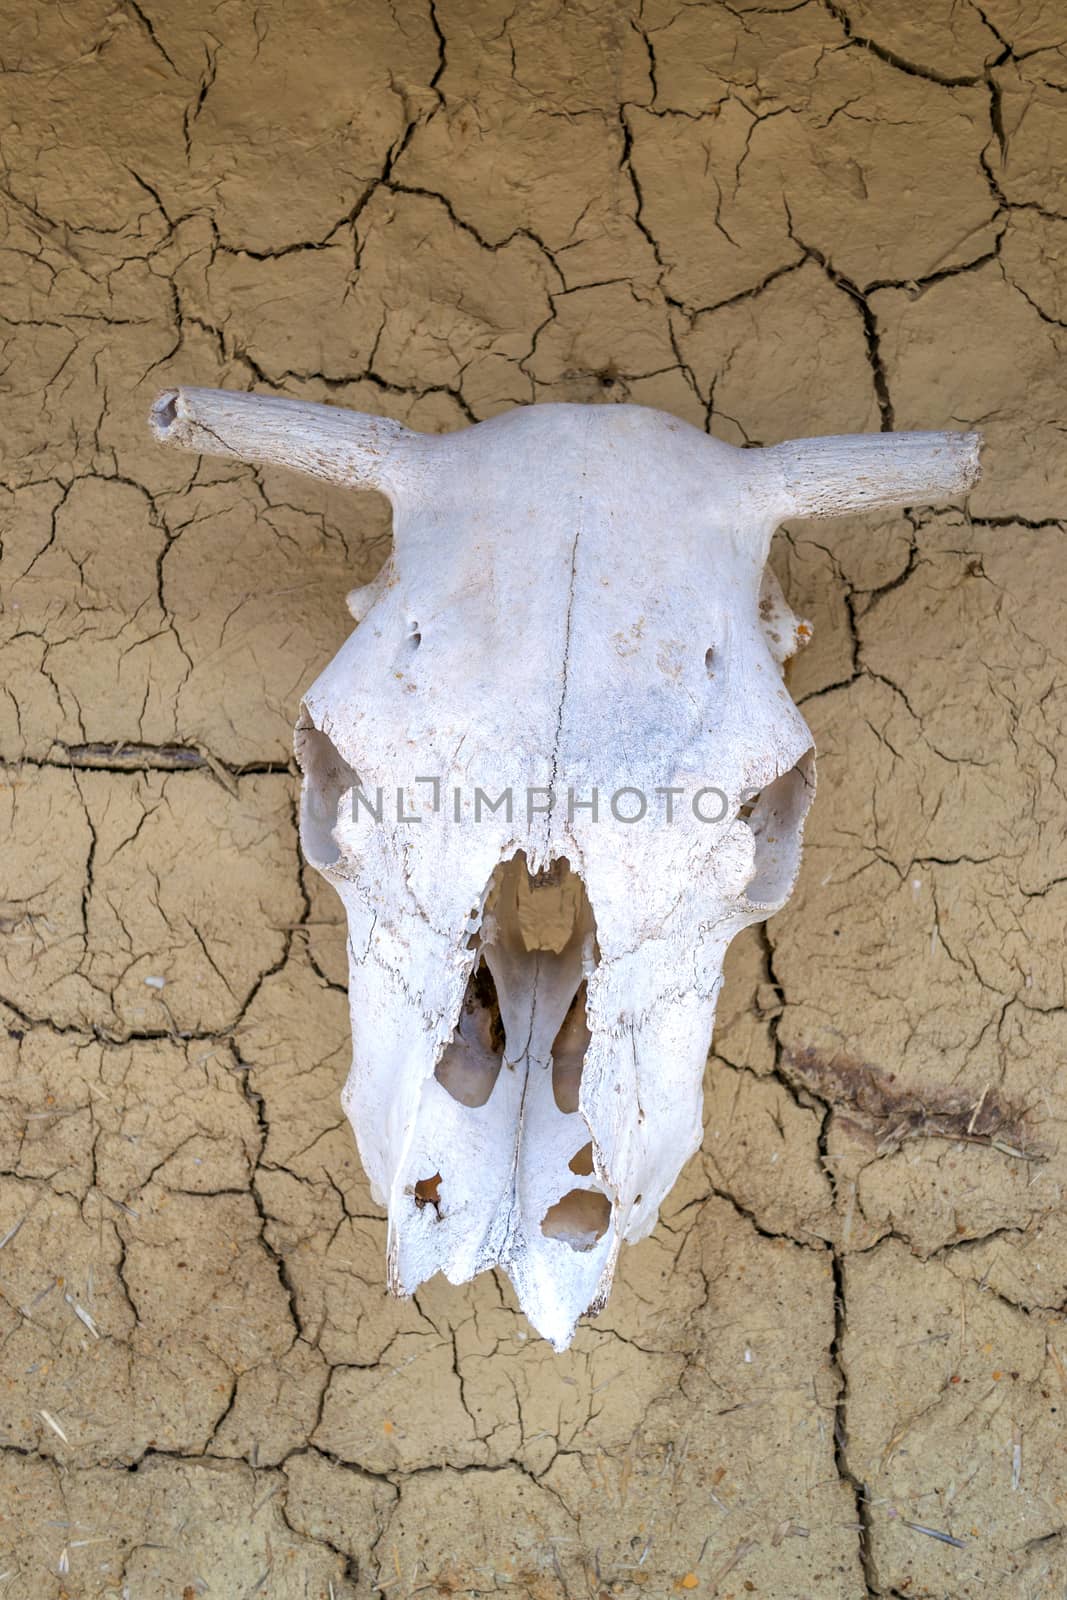 Skull of ox, hanging on old houlse